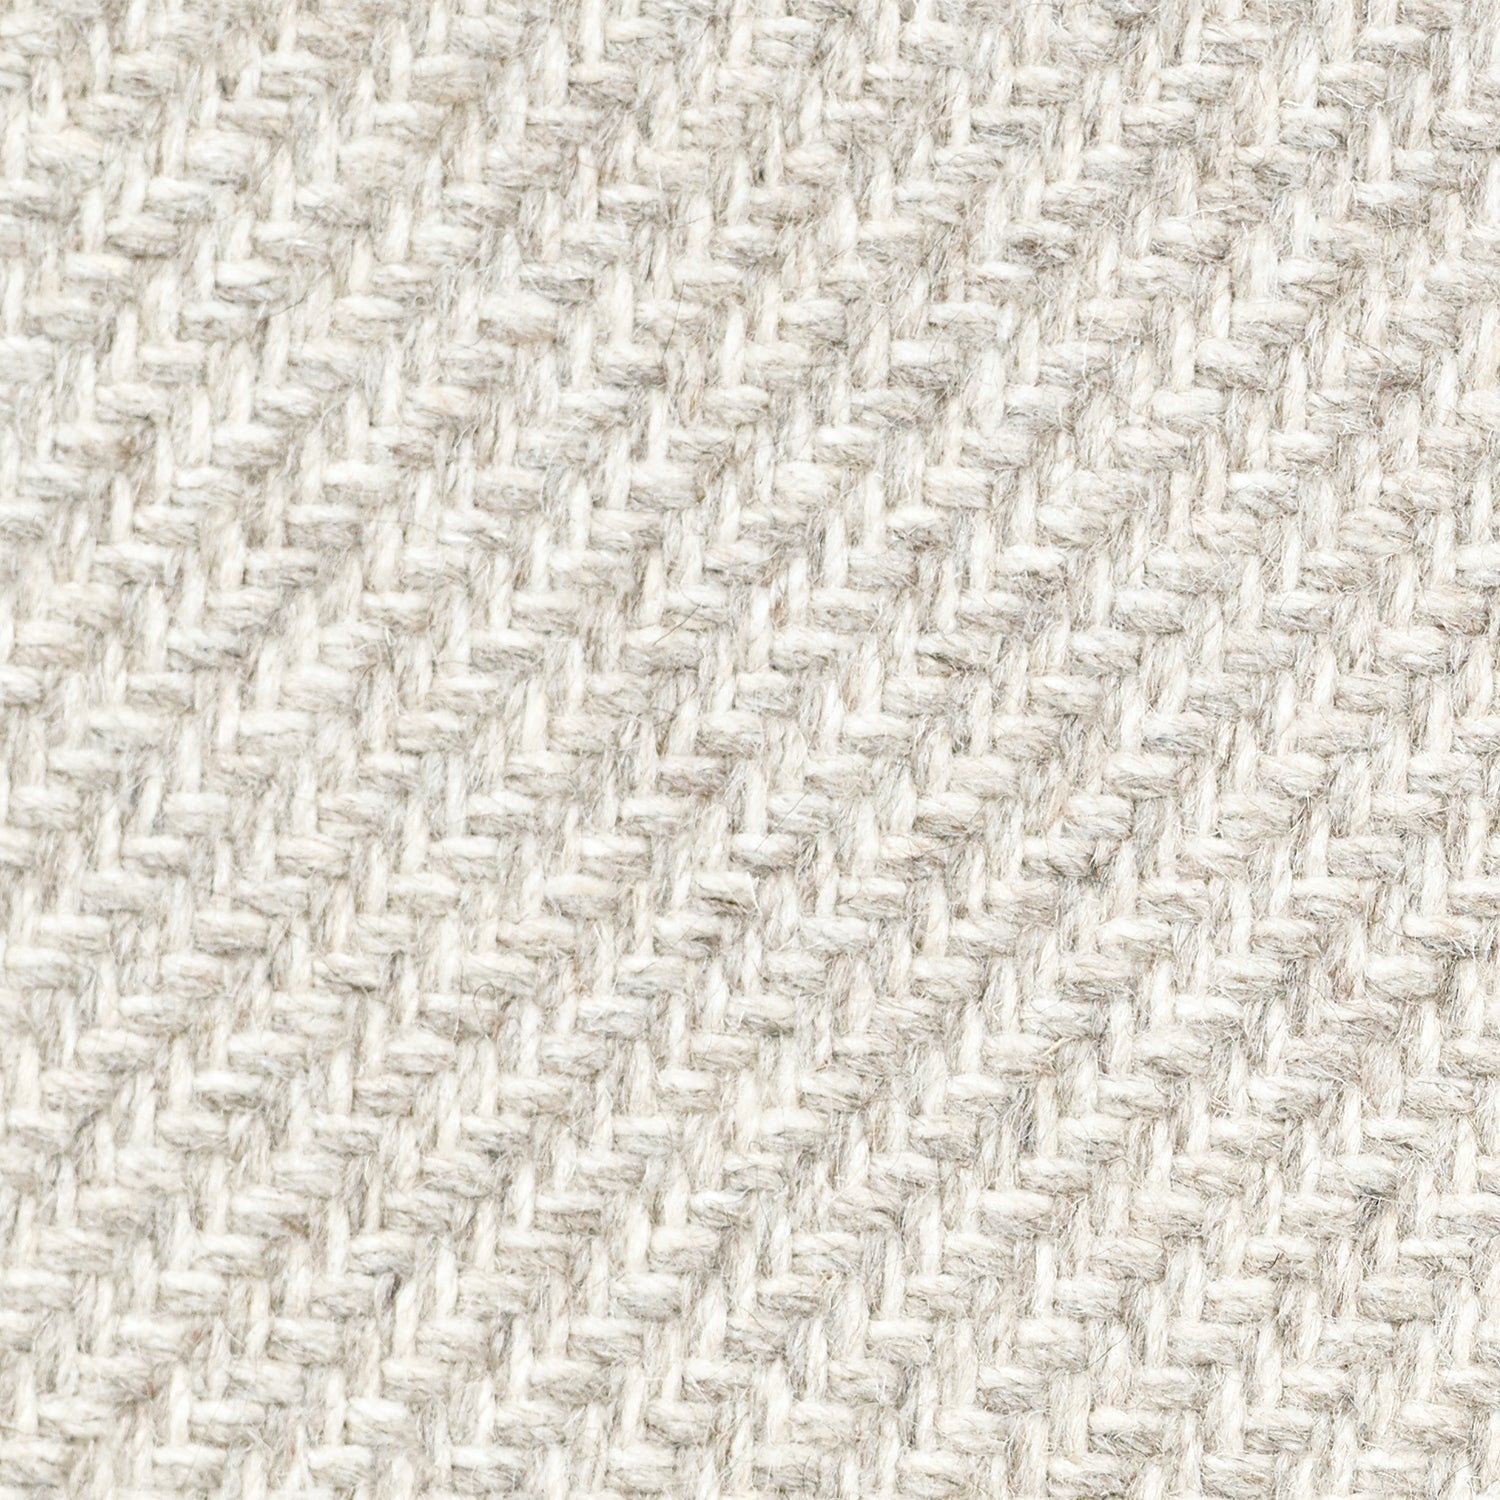 Wool broadloom carpet swatch in a high-pile diagonal stripe in mottled white and cream.